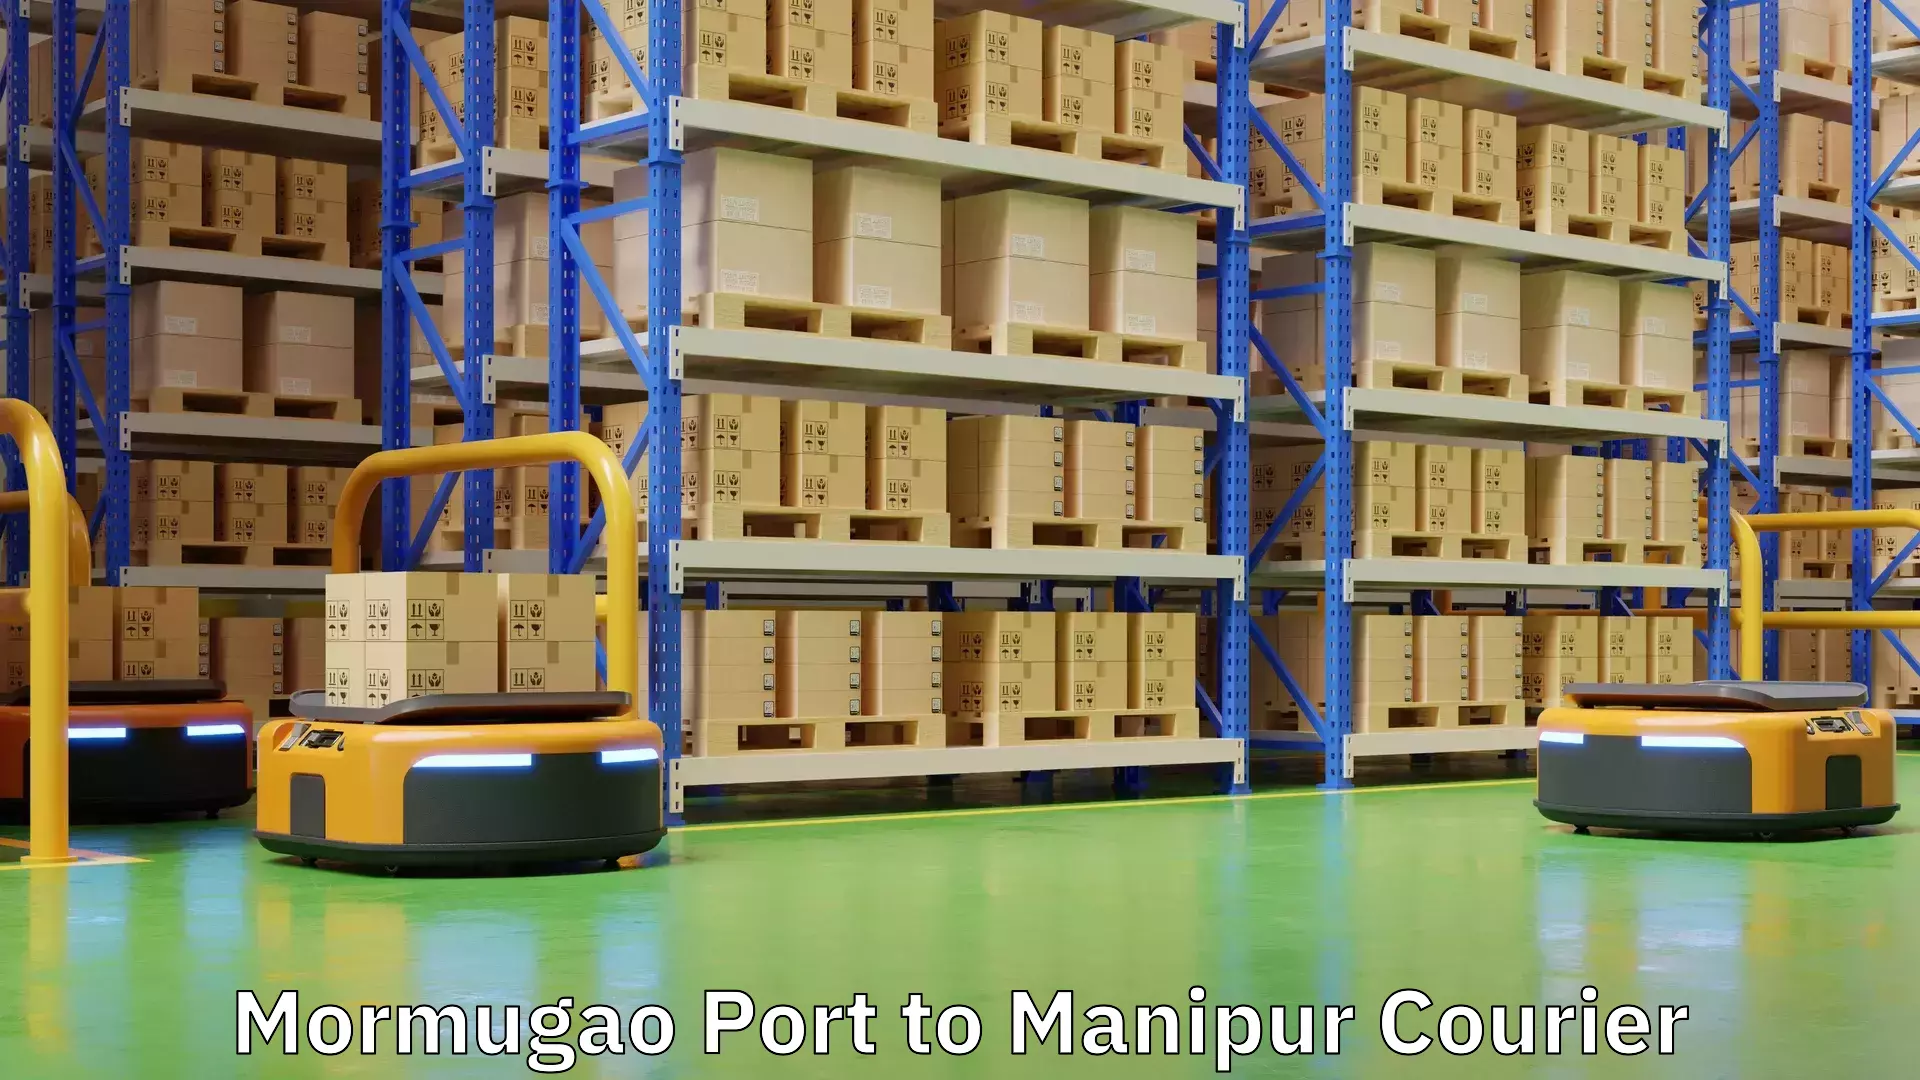 User-friendly delivery service Mormugao Port to Manipur